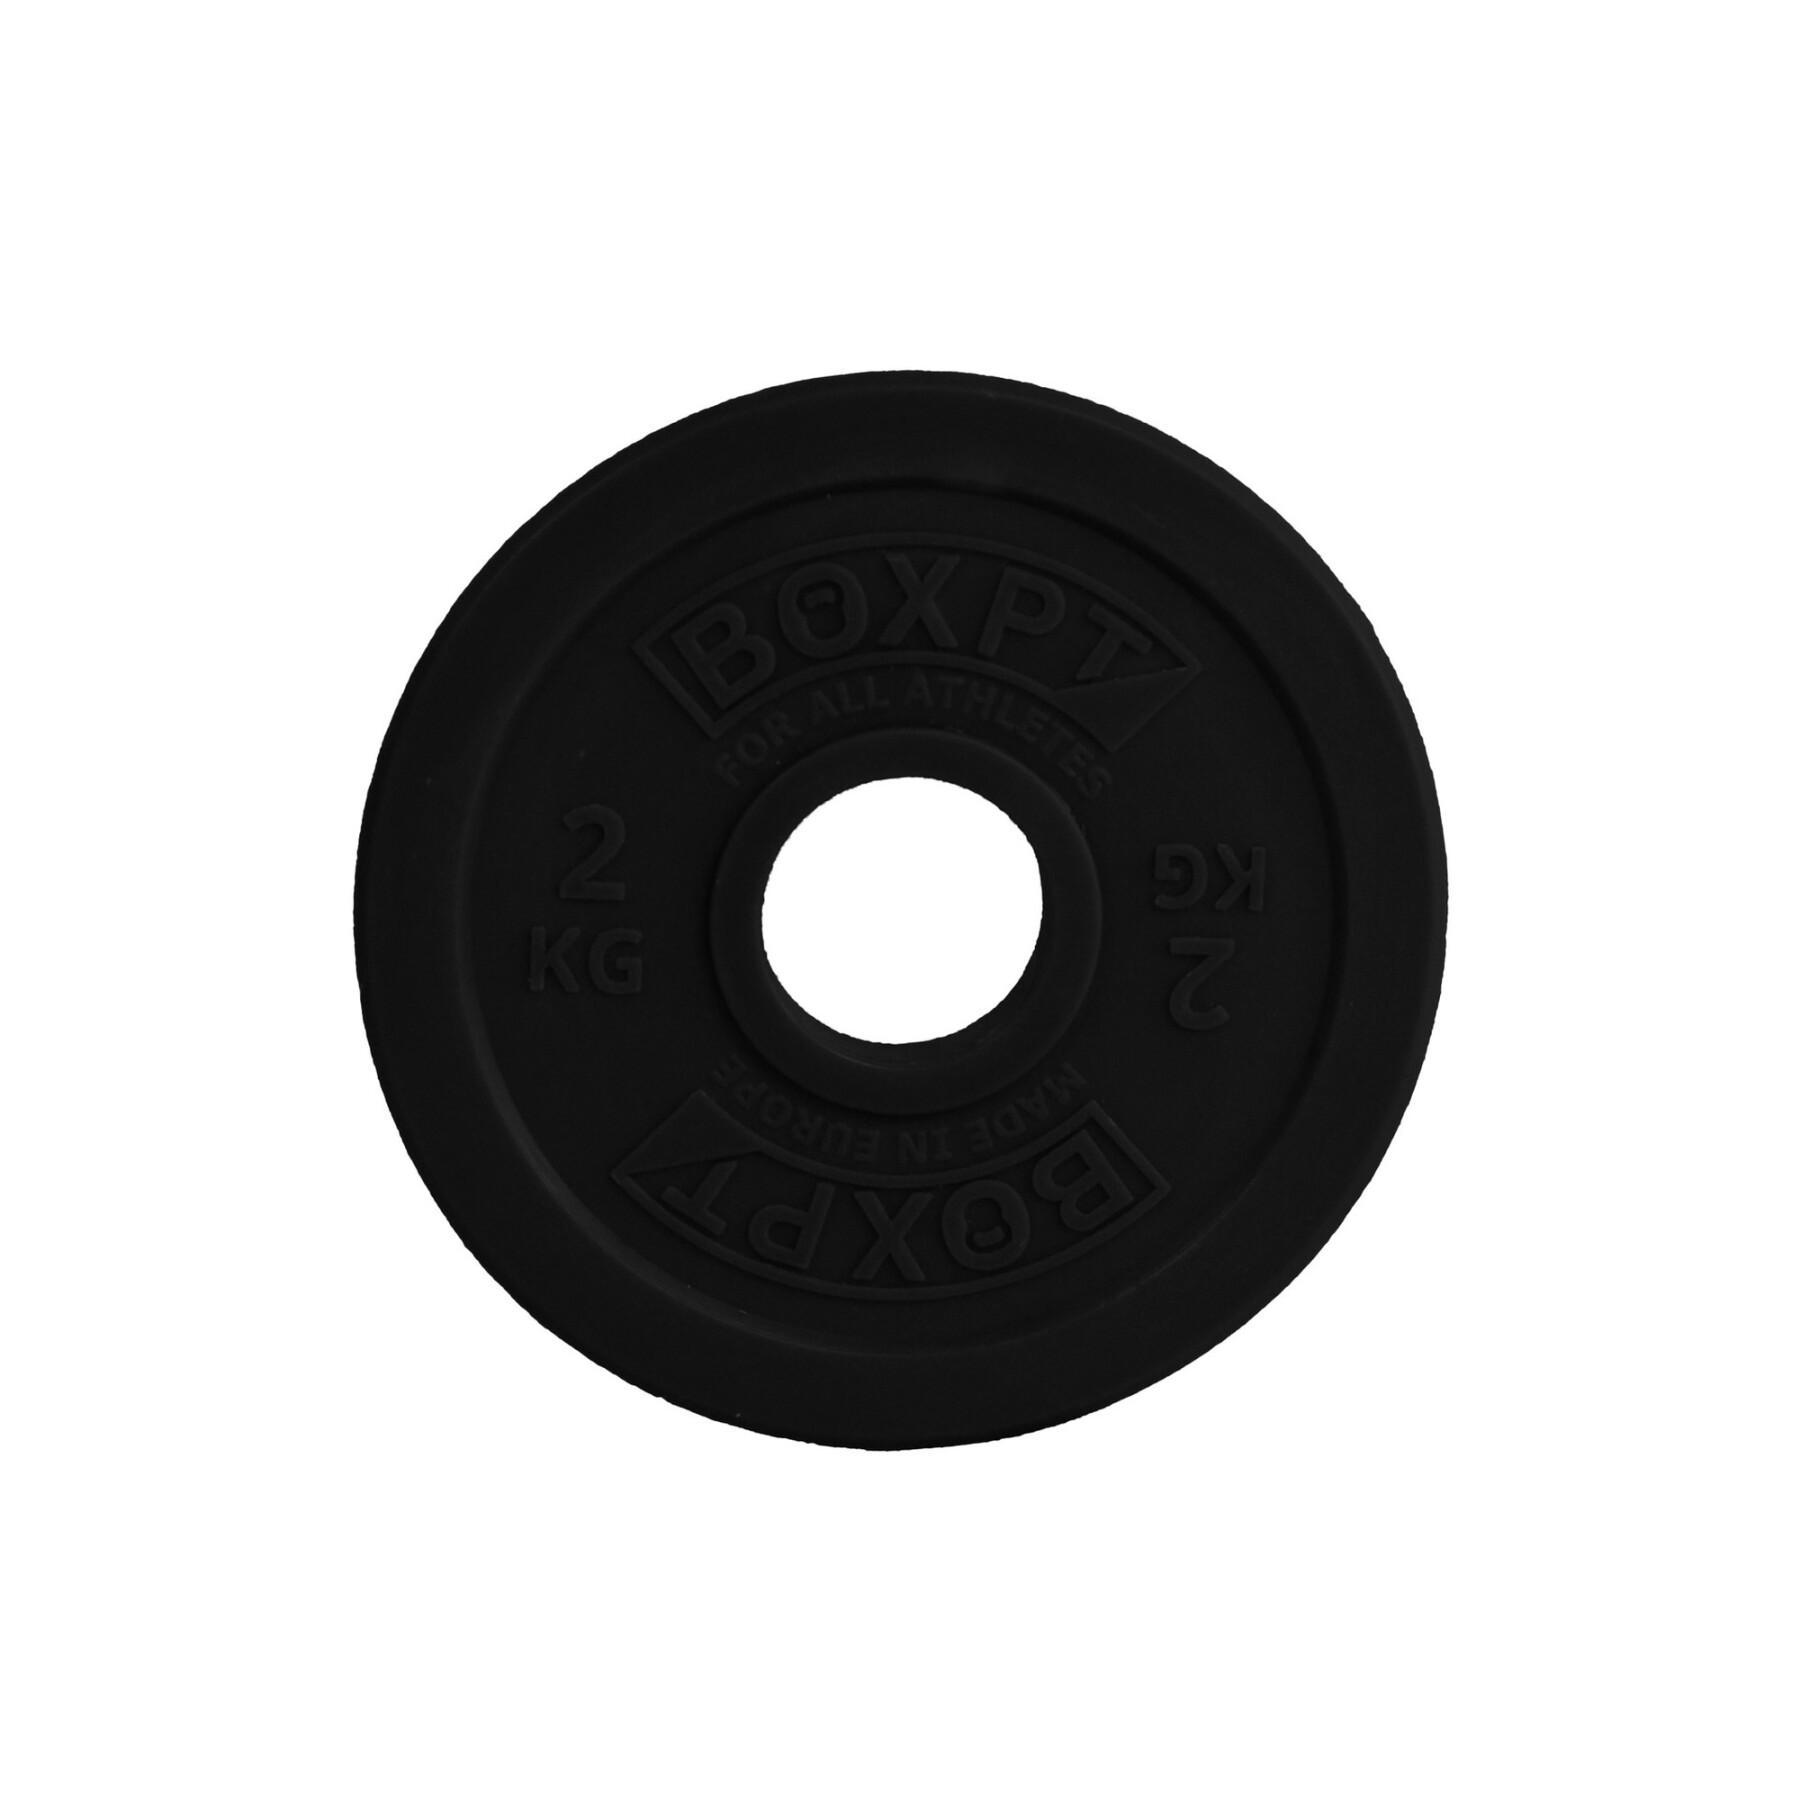 Additional weight discs Boxpt 2,5 kg